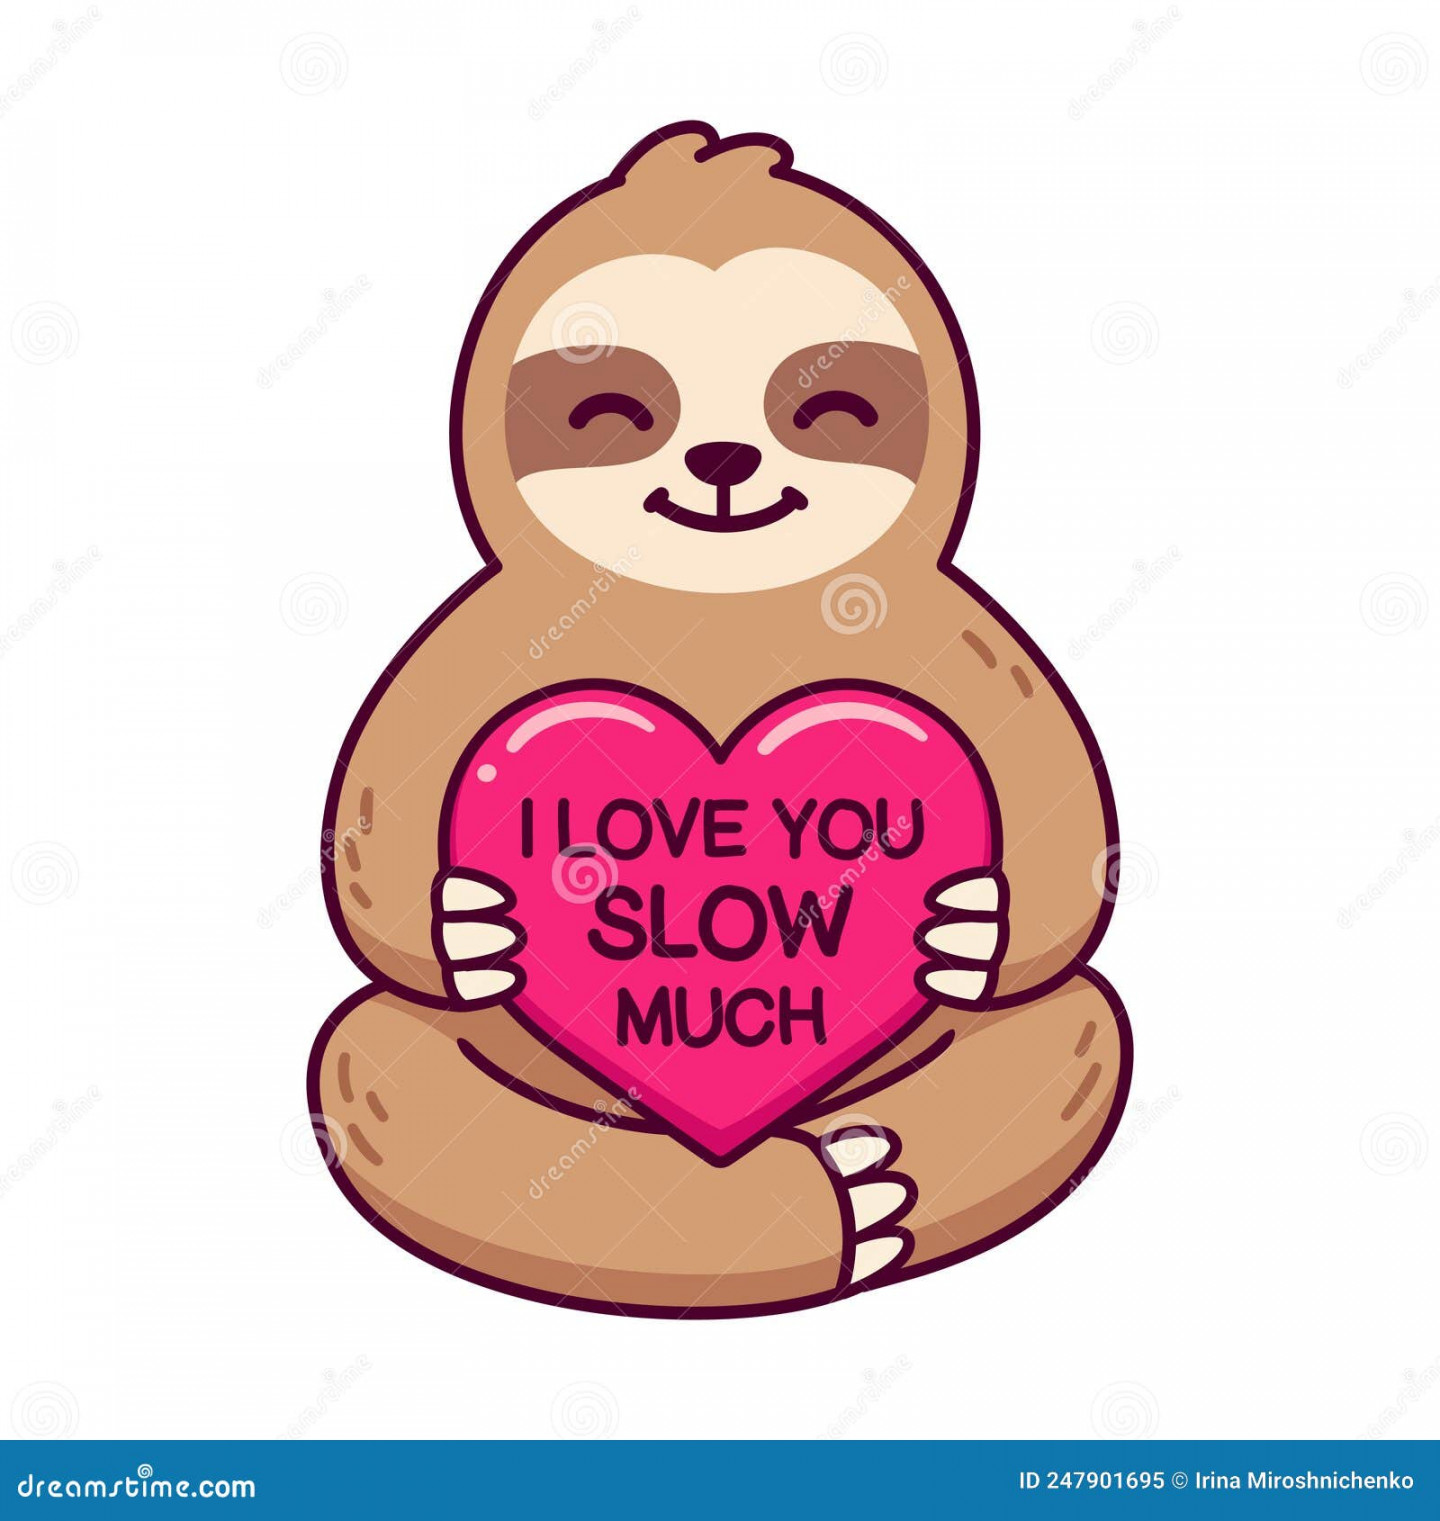 Cute Sloth Love You Slow Much Stock Vector - Illustration of